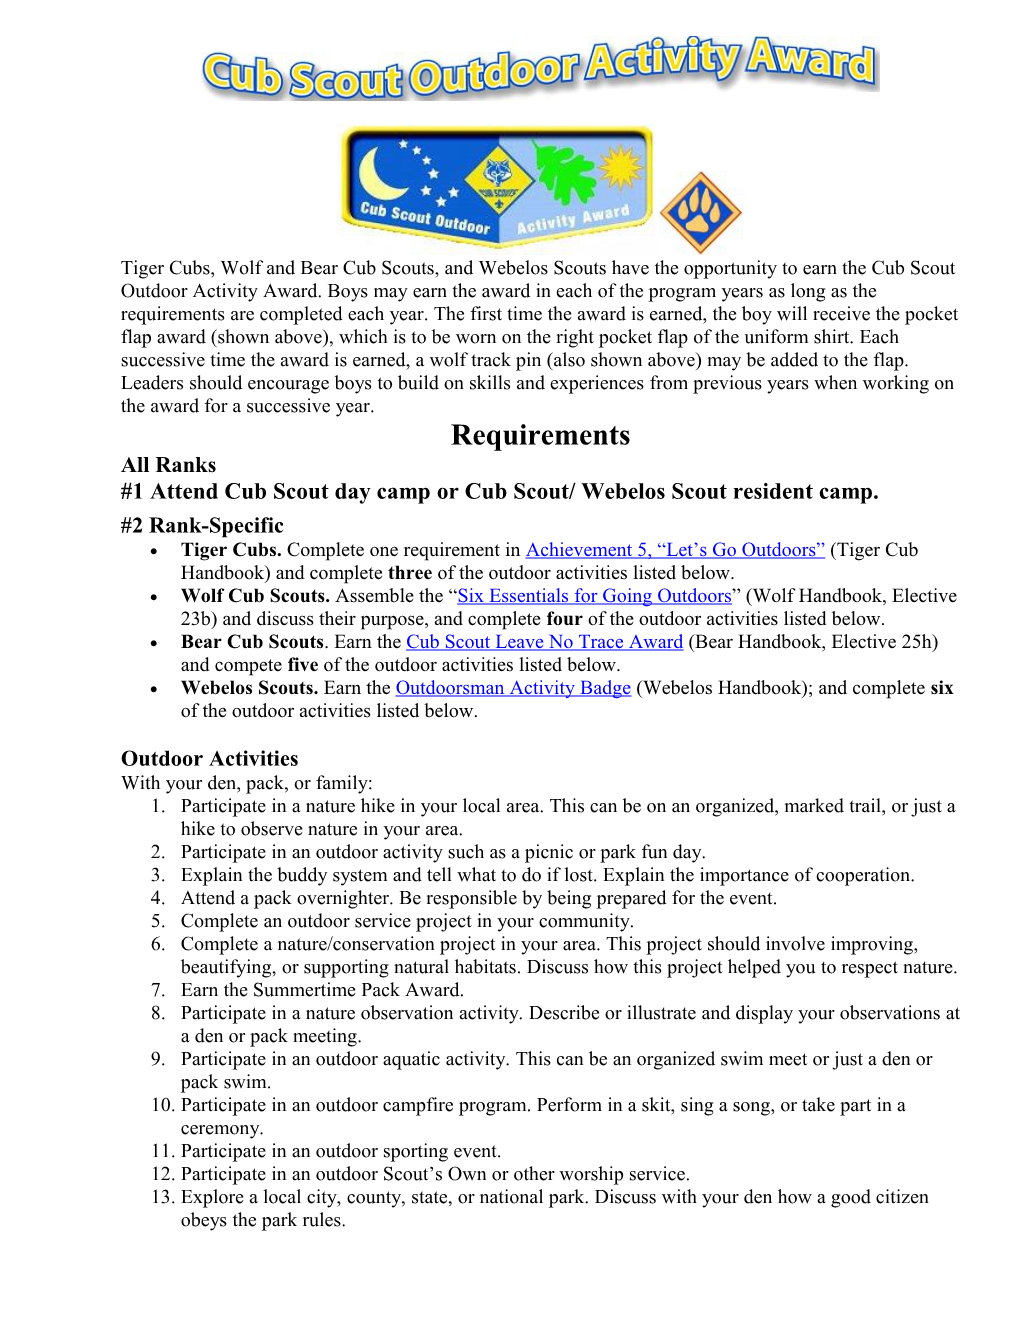 1 Attend Cub Scout Day Camp Or Cub Scout/ Webelos Scout Resident Camp